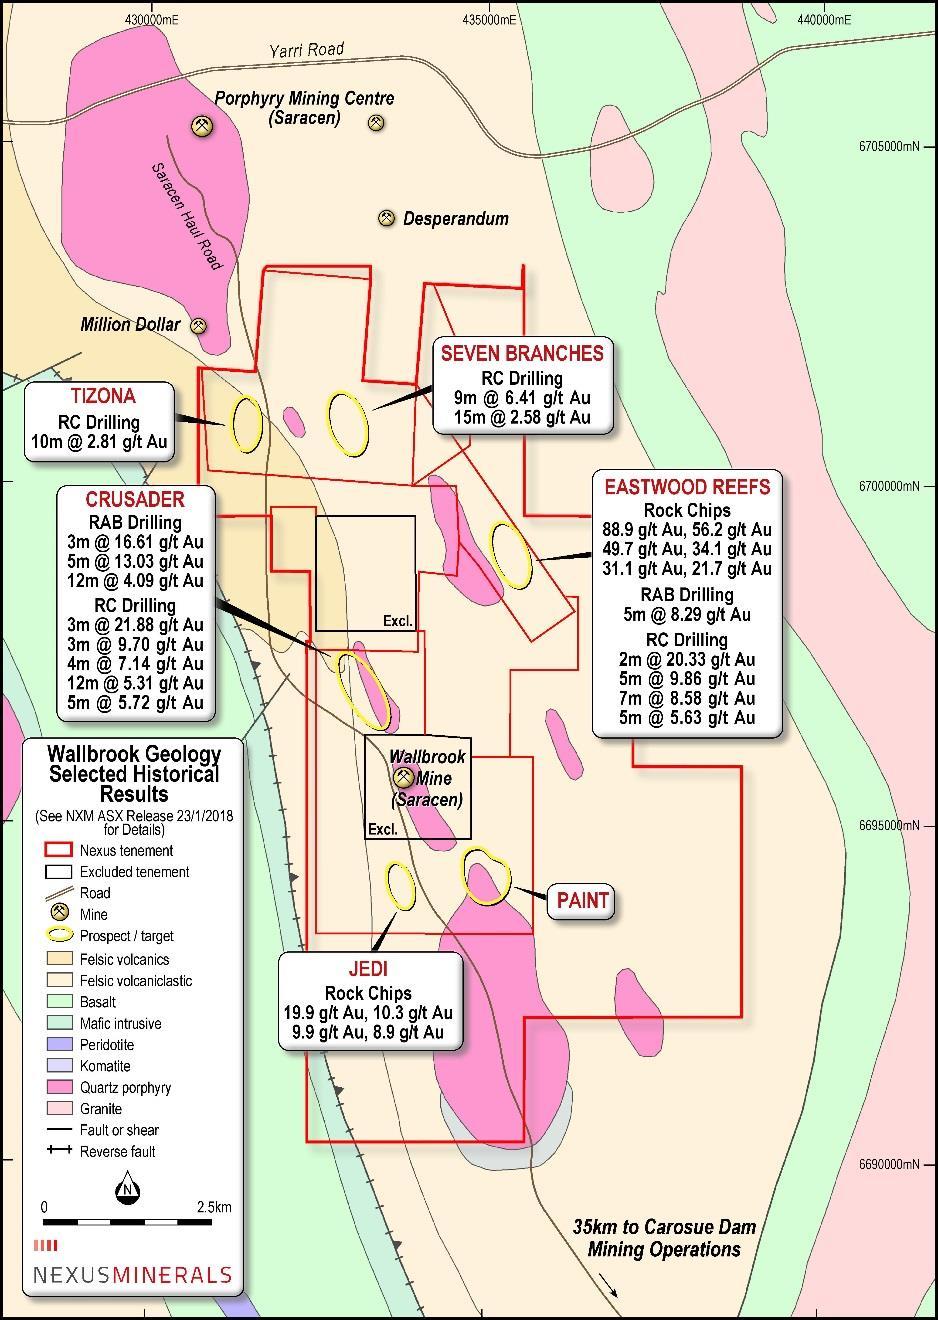 Previous Exploration Activities The Wallbrook project contains no prior large scale commercial mining operations.